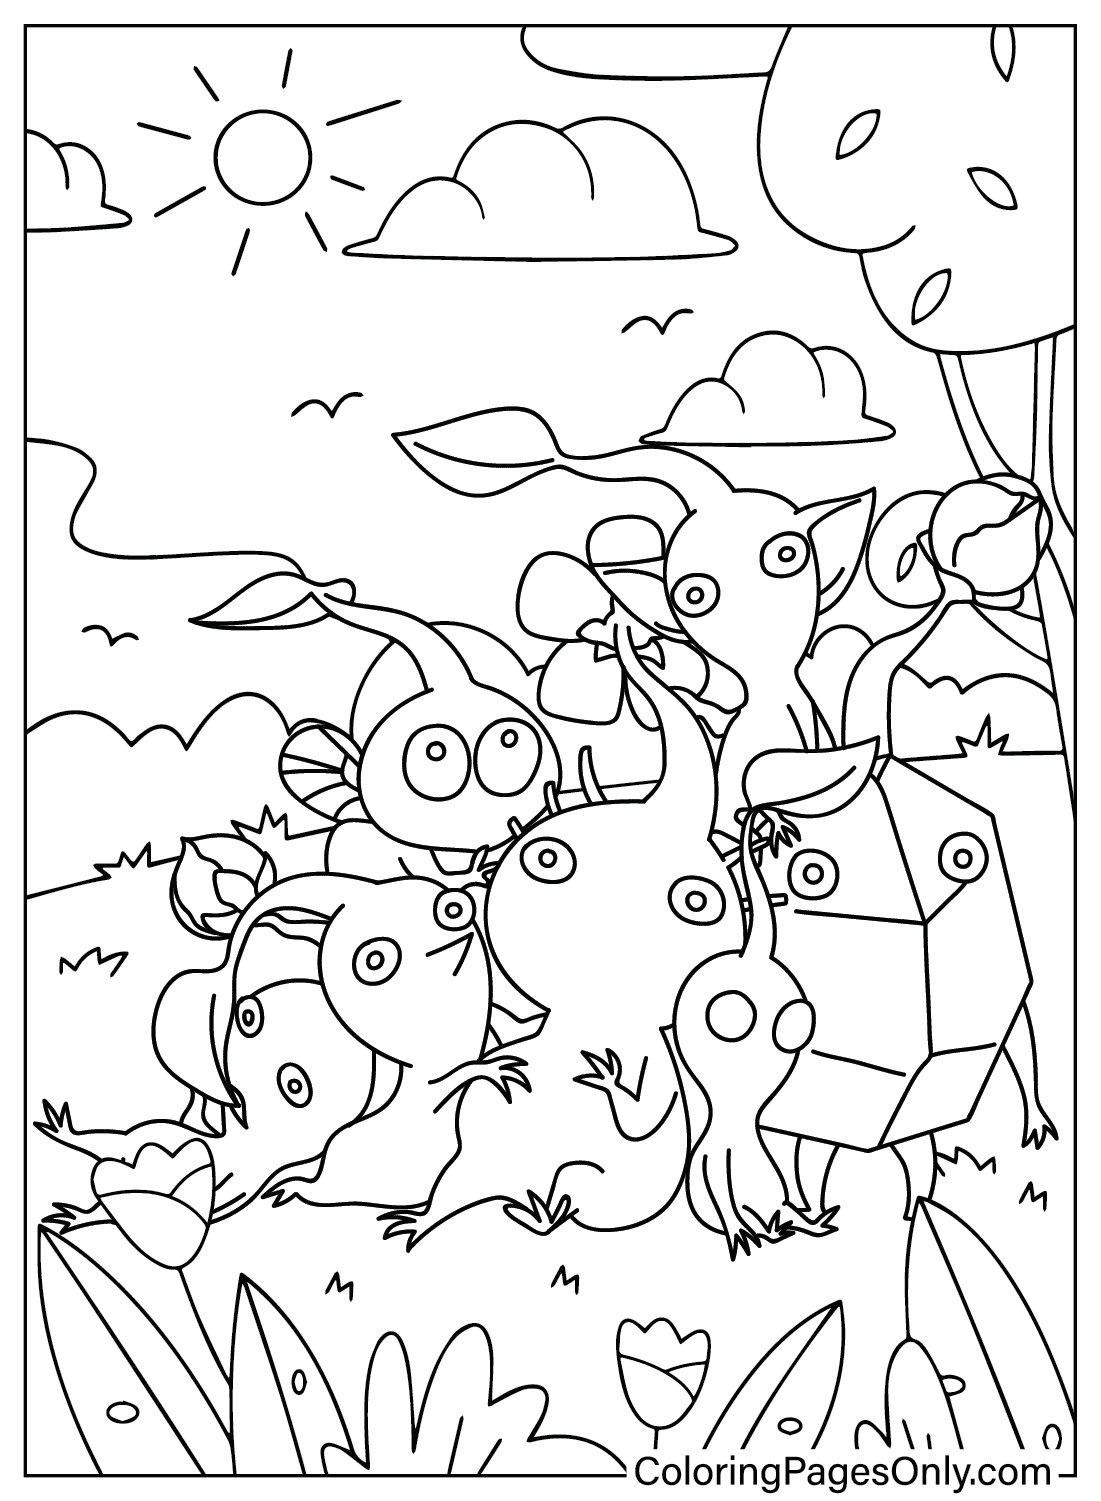 Pikmin Coloring Page Free from Pikmin